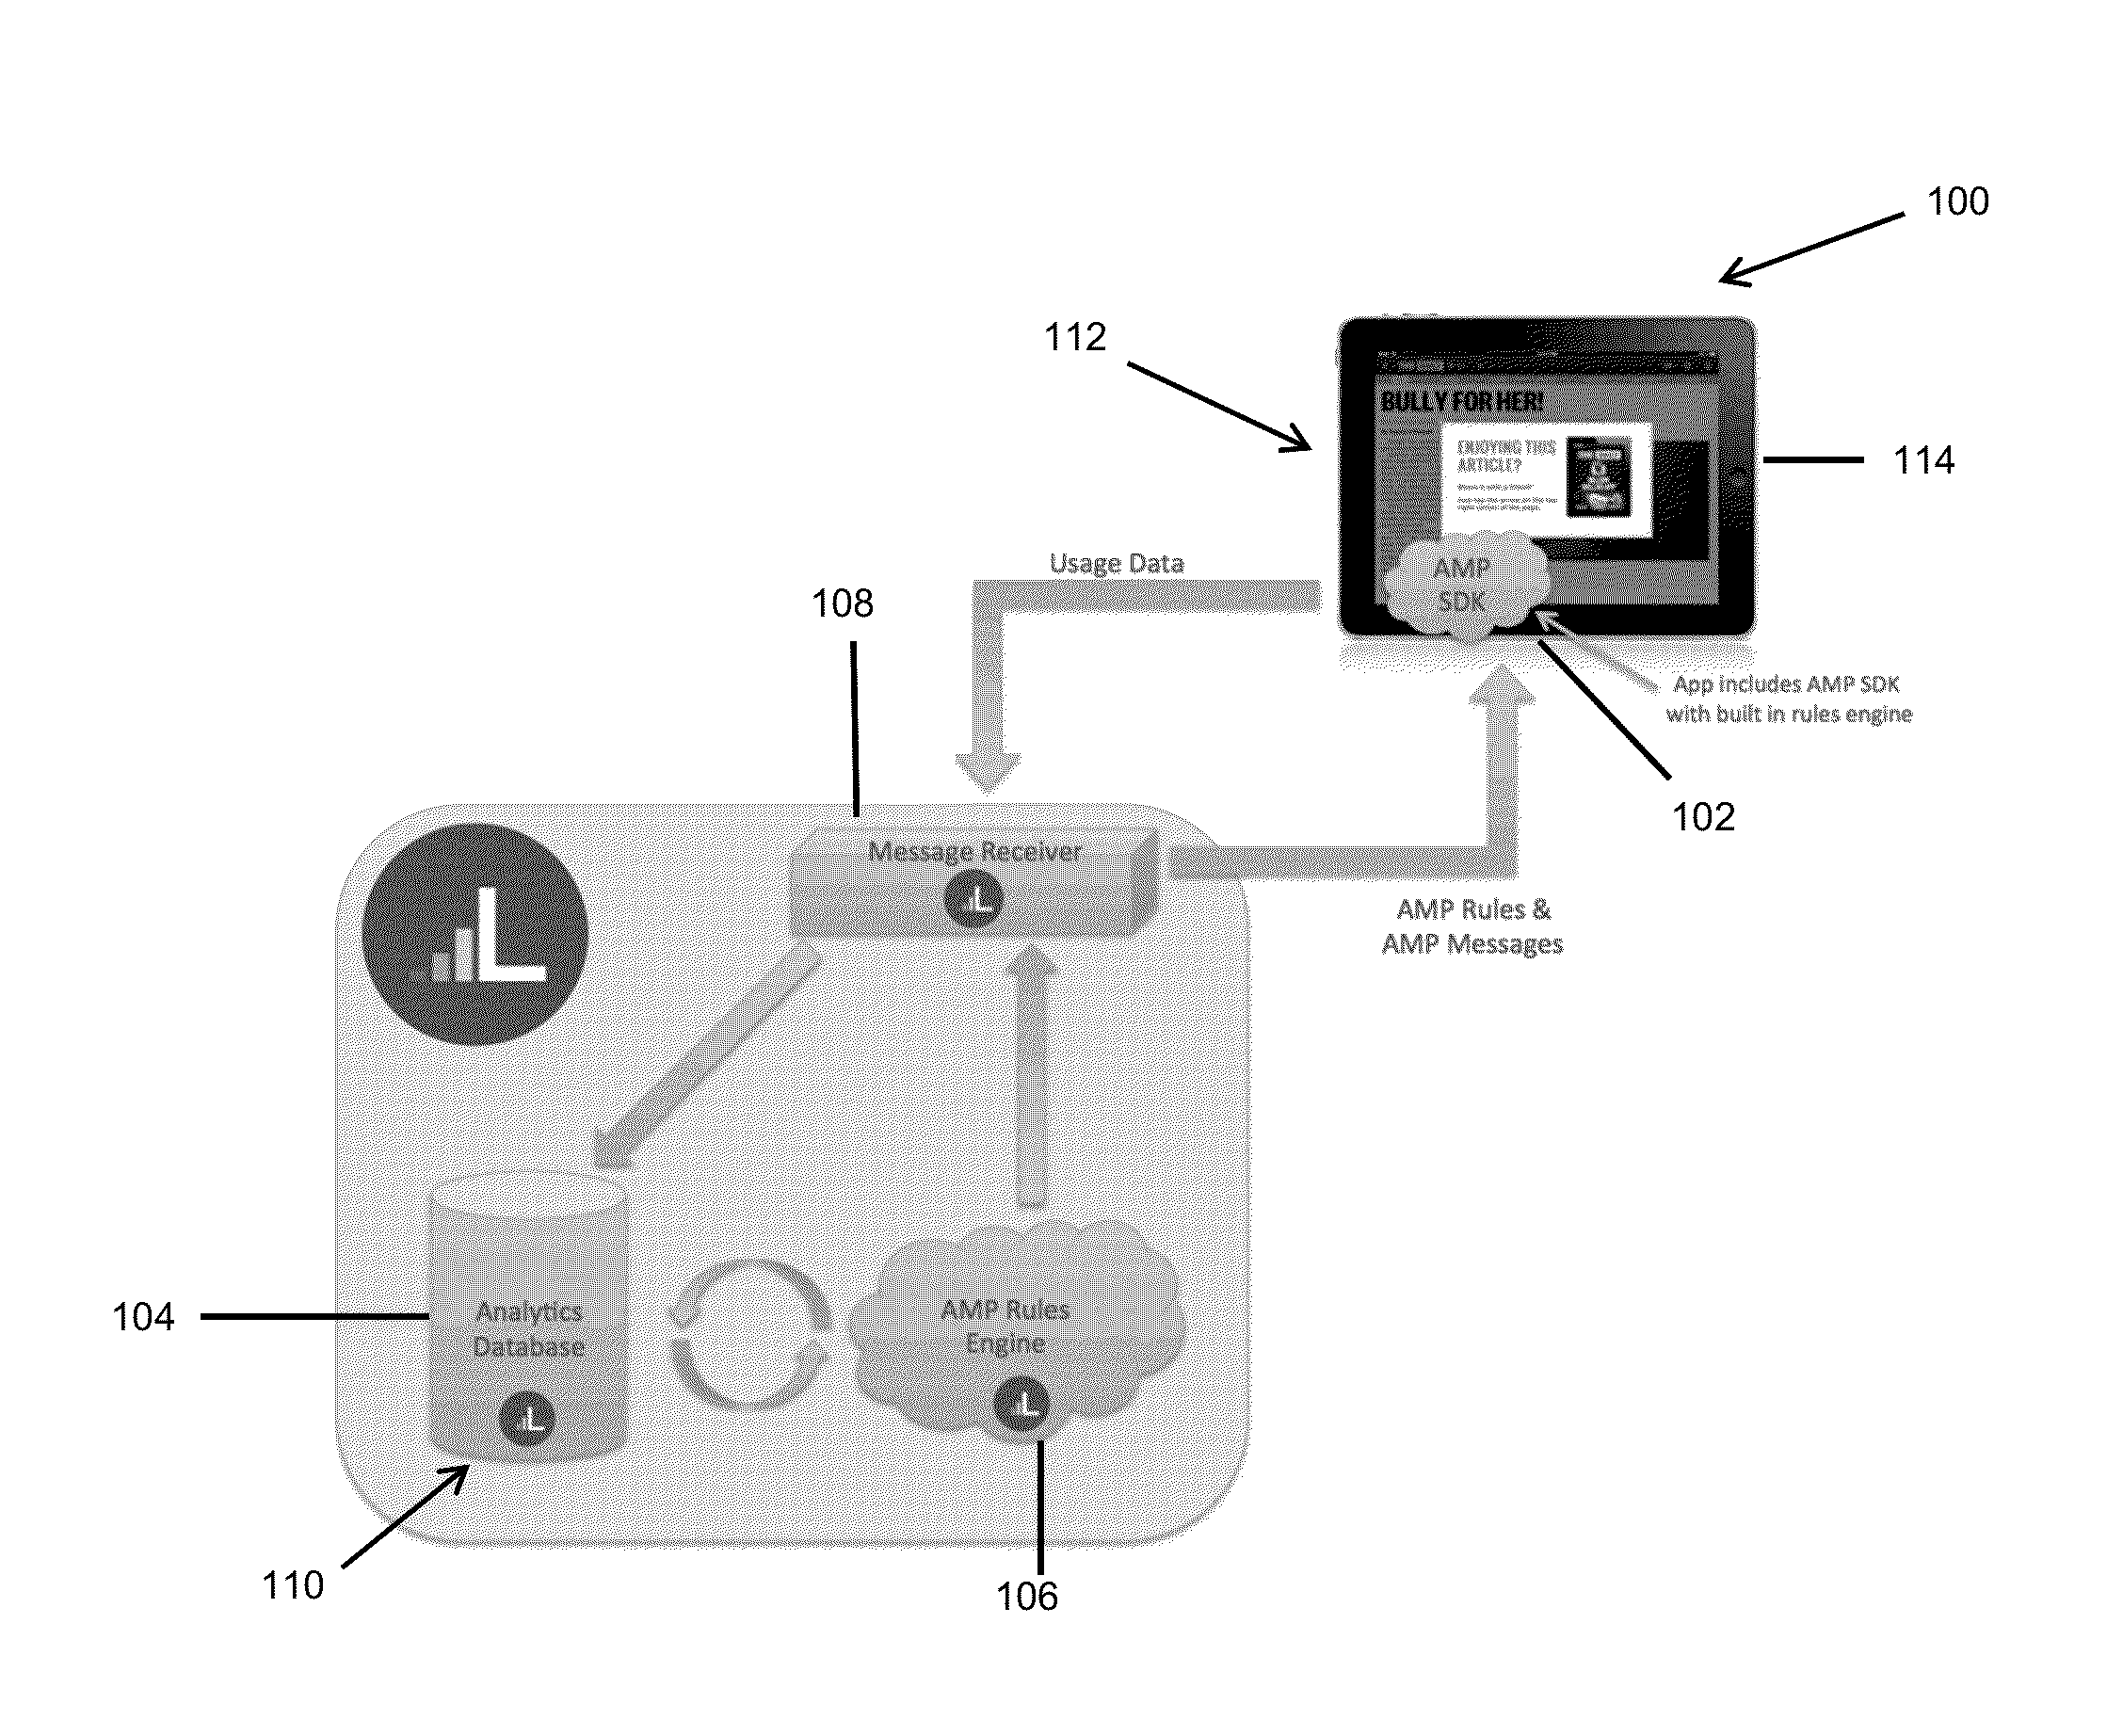 System and Method for Performing Application-Level Analytics and Testing to Tailor Actions and Communications to a User's Experience